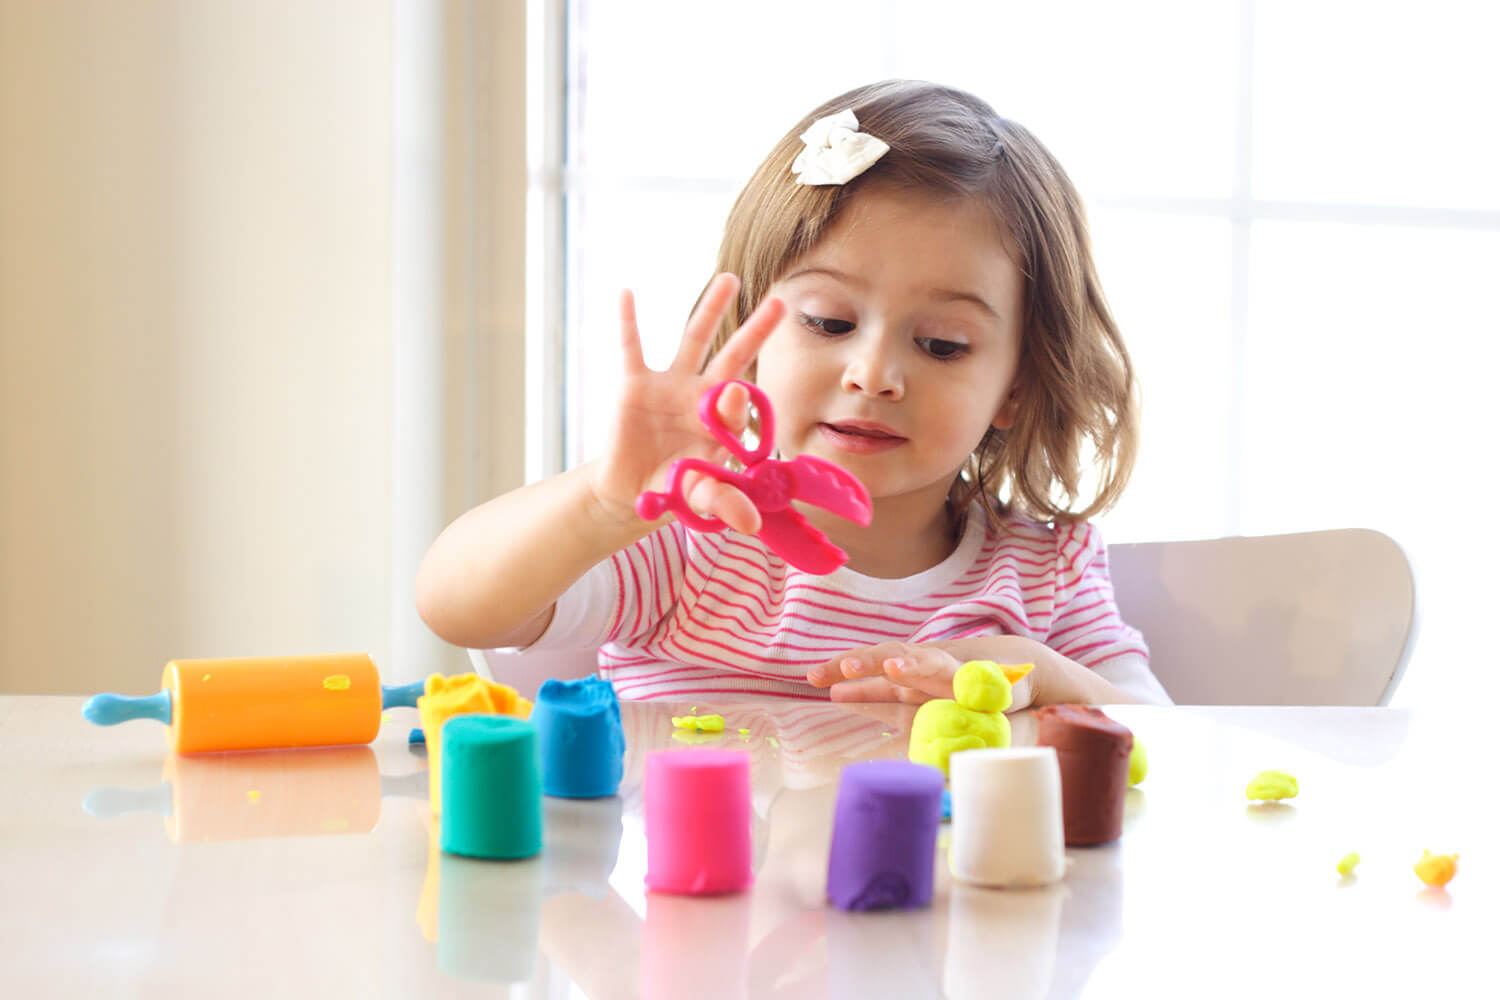 Play-Doh scissors held up by girl surrounded by Play-Doh.